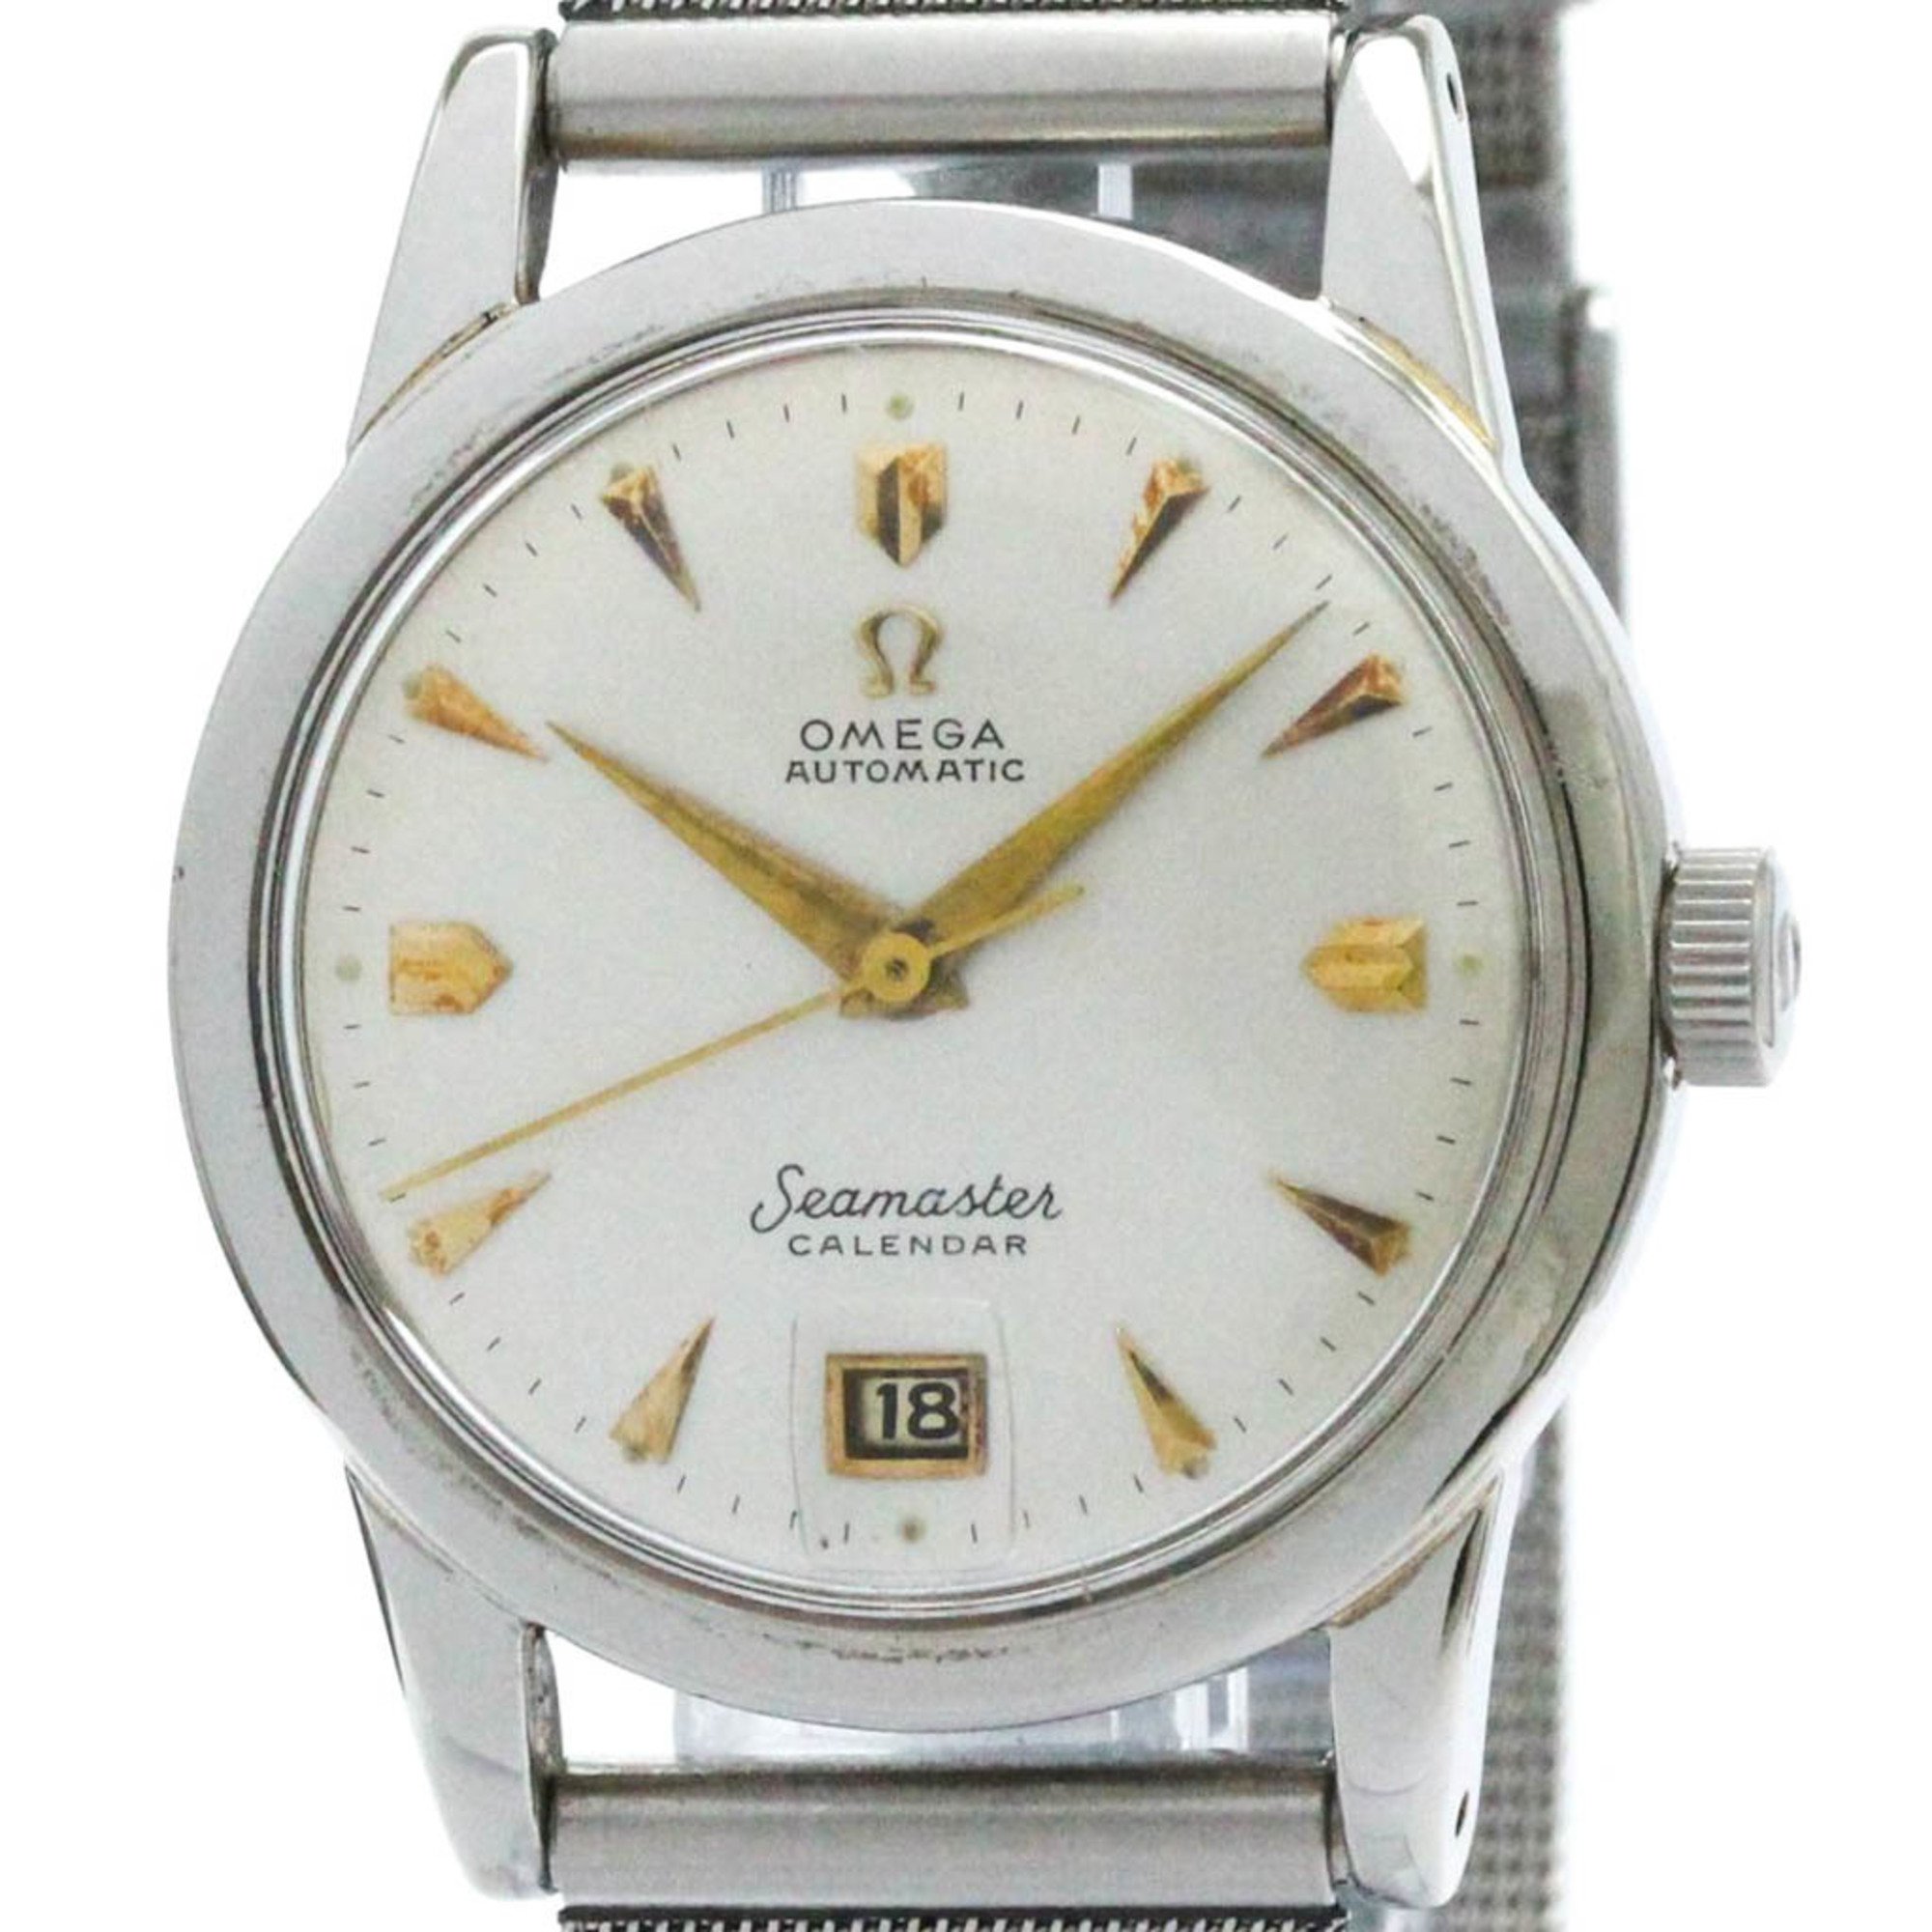 Vintage OMEGA Seamaster Calendar Cal 355 Steel Automatic Watch 2577 BF568479